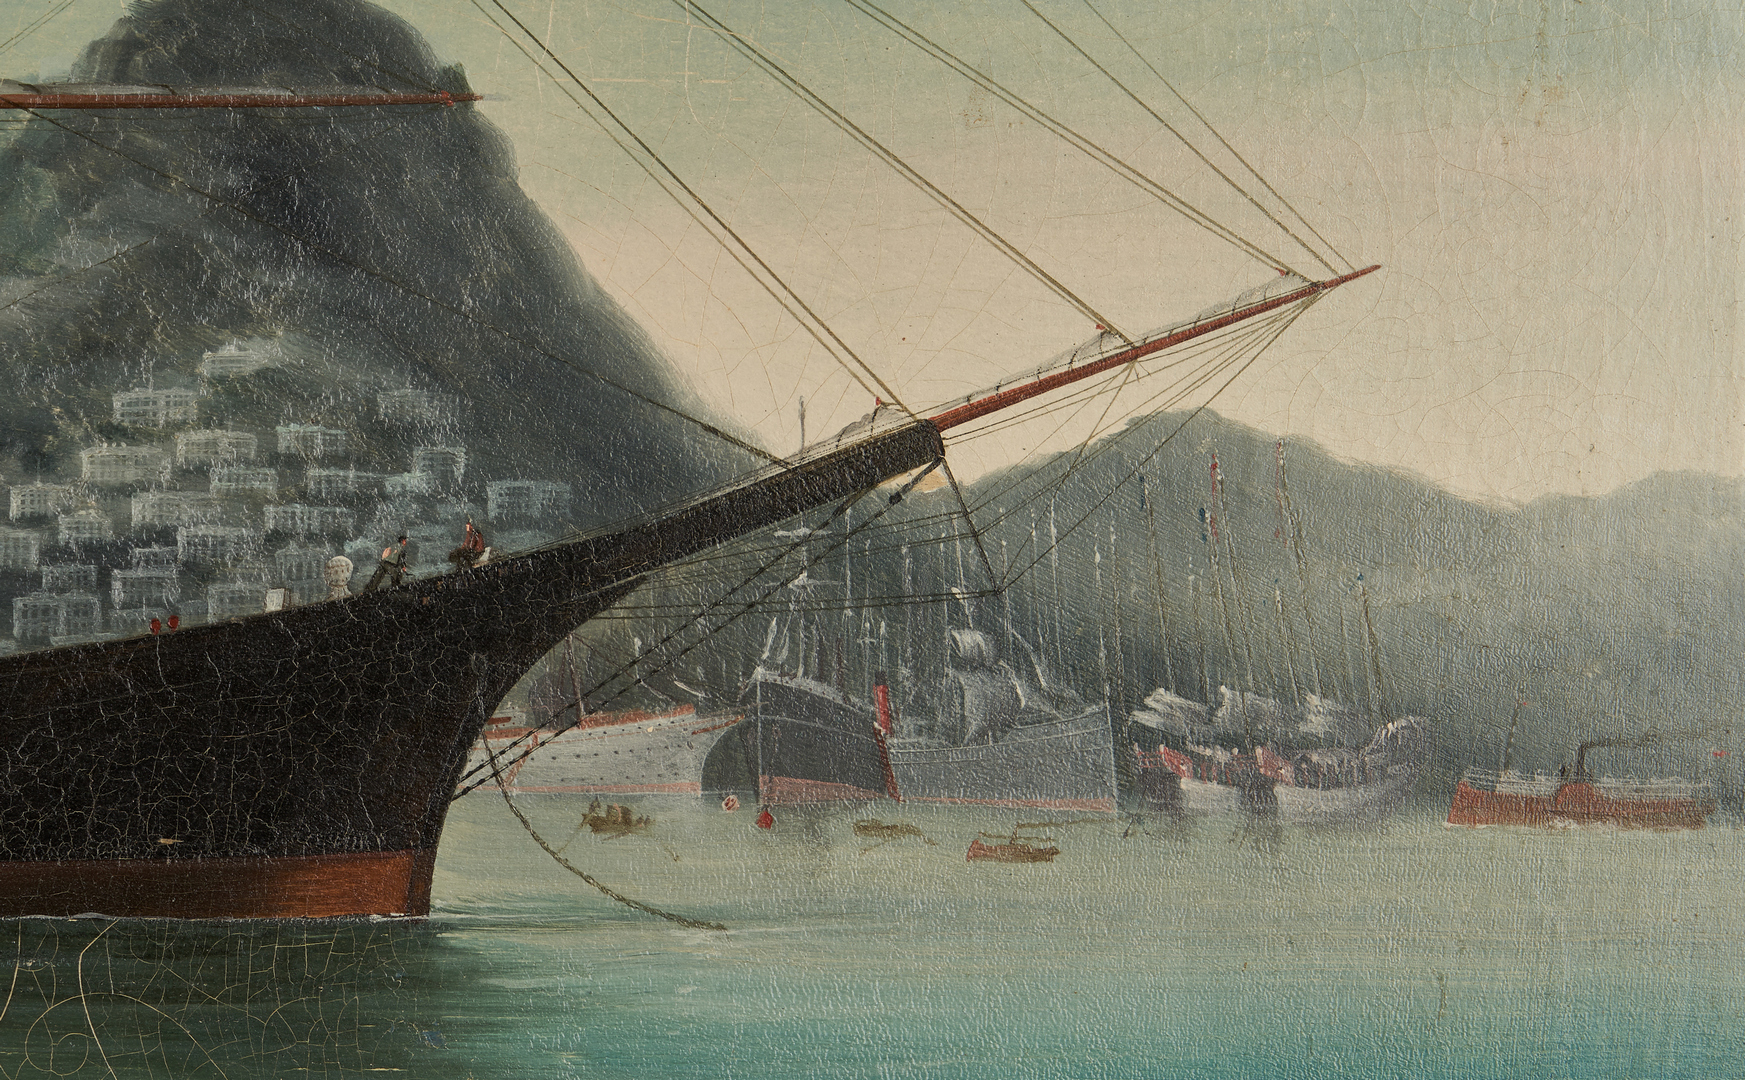 Lot 122: Chinese Export Marine Painting, Challenger